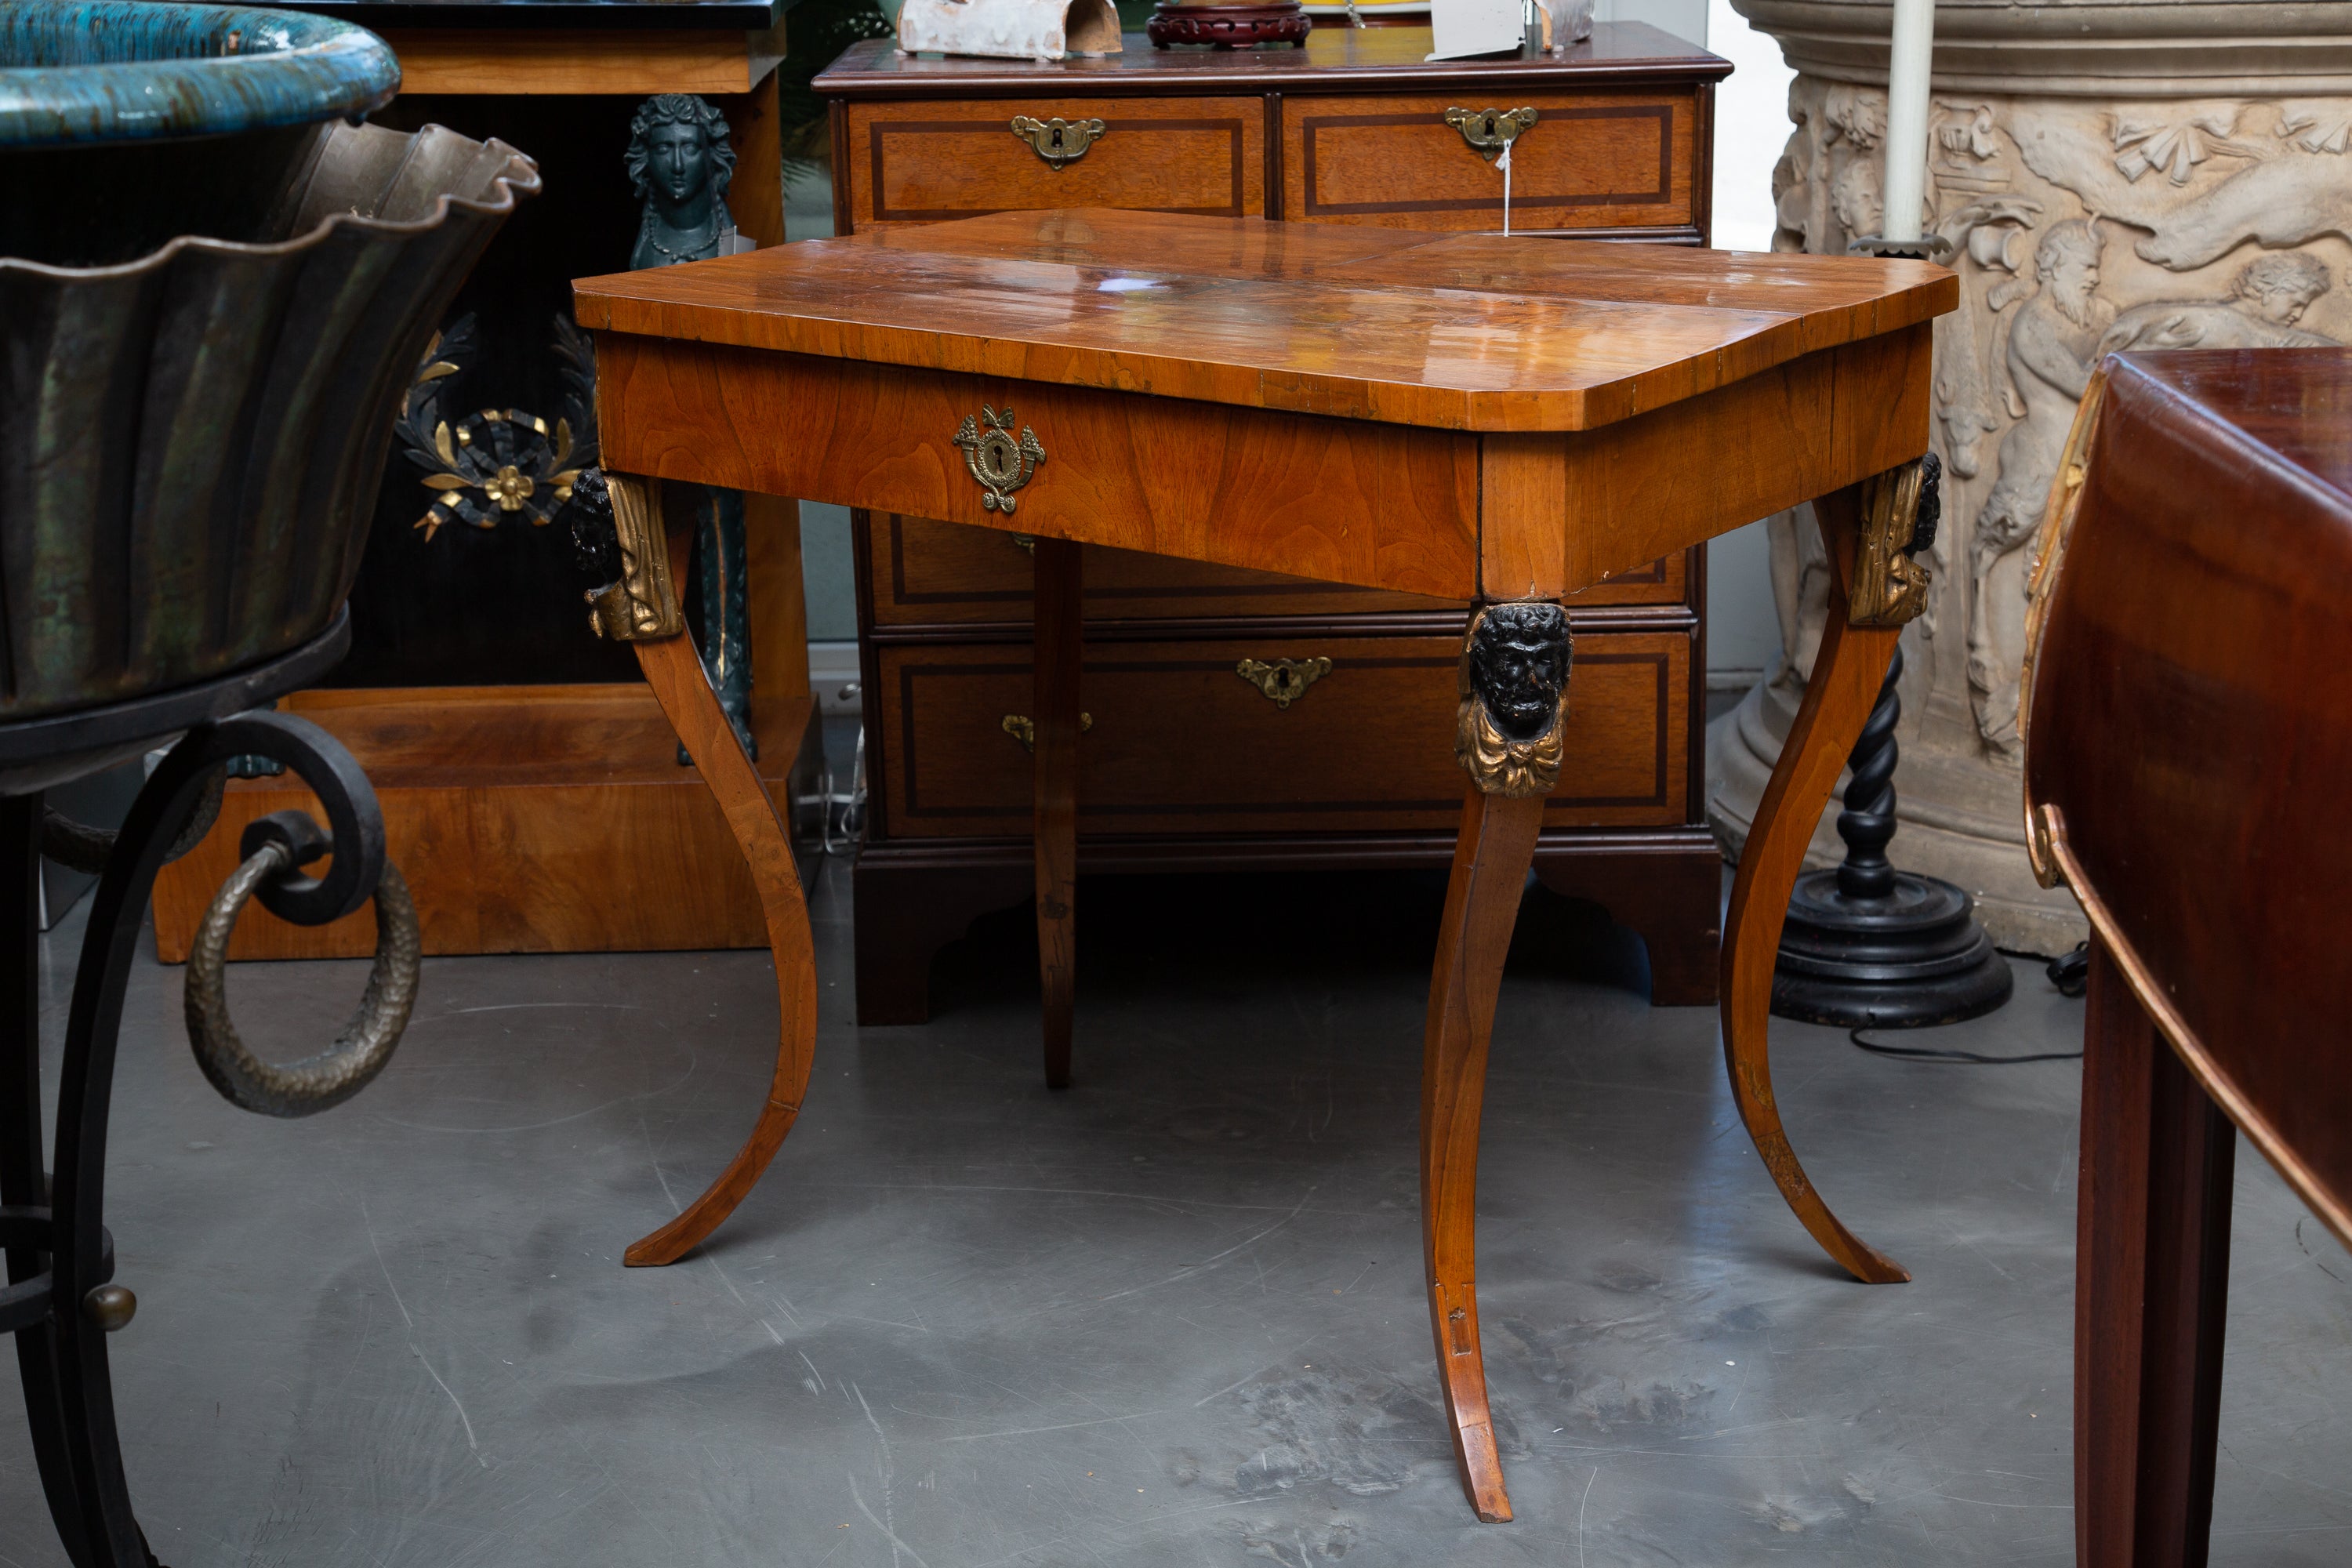 This is a refined Biedermeier walnut ebonized and parcel gilt side table, the top with straight edge over a long frieze drawer and supported by graceful out-curved legs with ebonized and parcel gilt masks on the knees, 19th Century.